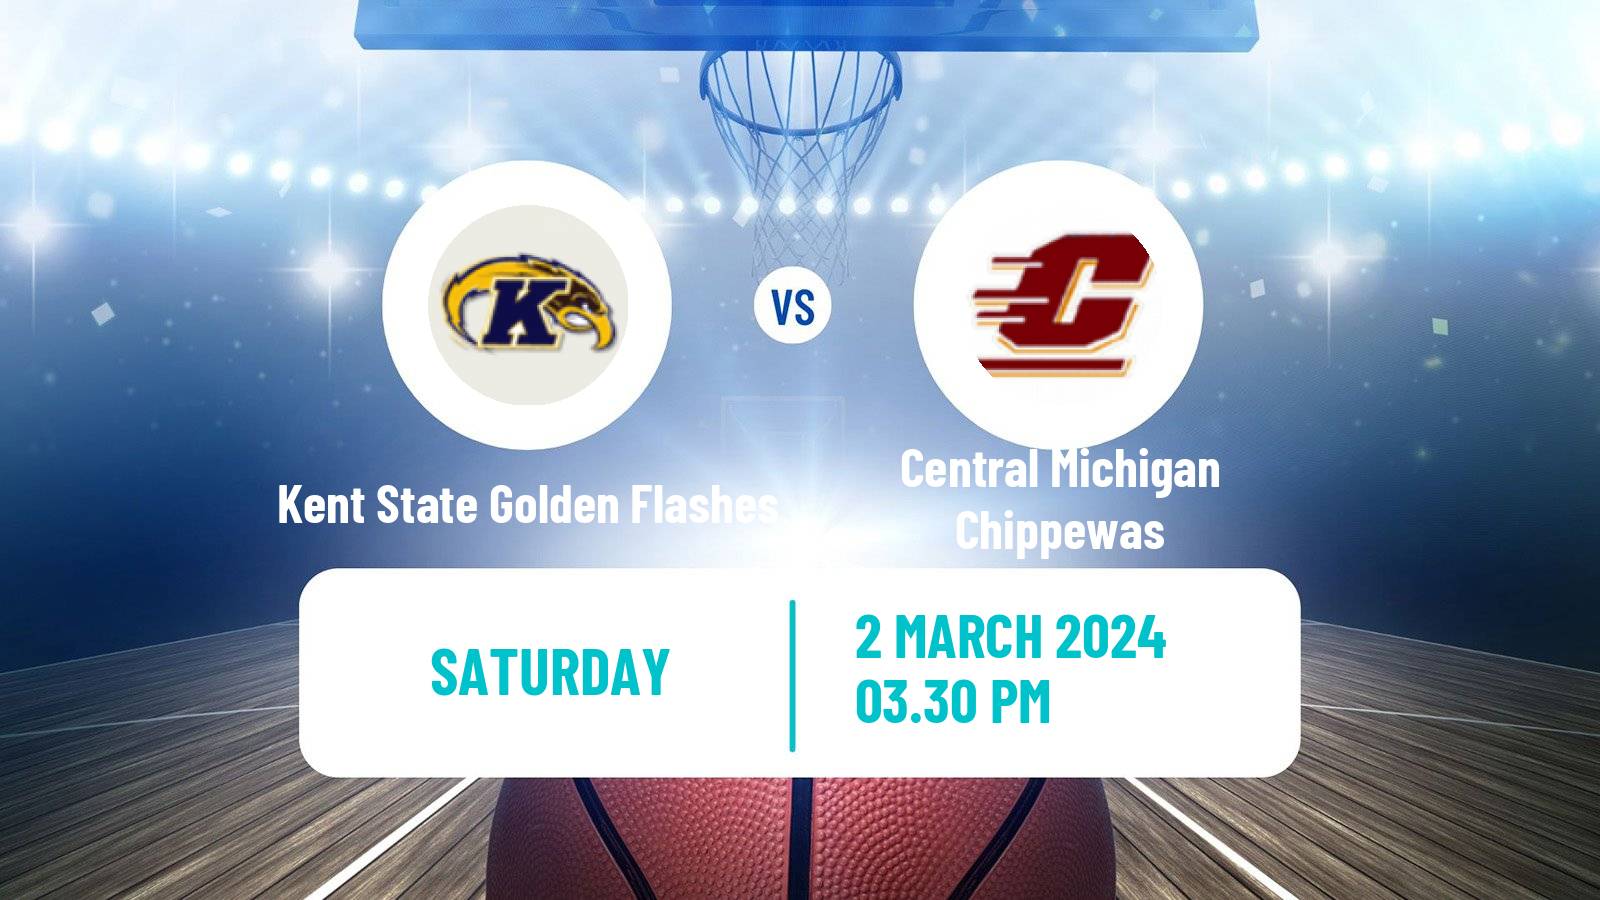 Basketball NCAA College Basketball Kent State Golden Flashes - Central Michigan Chippewas